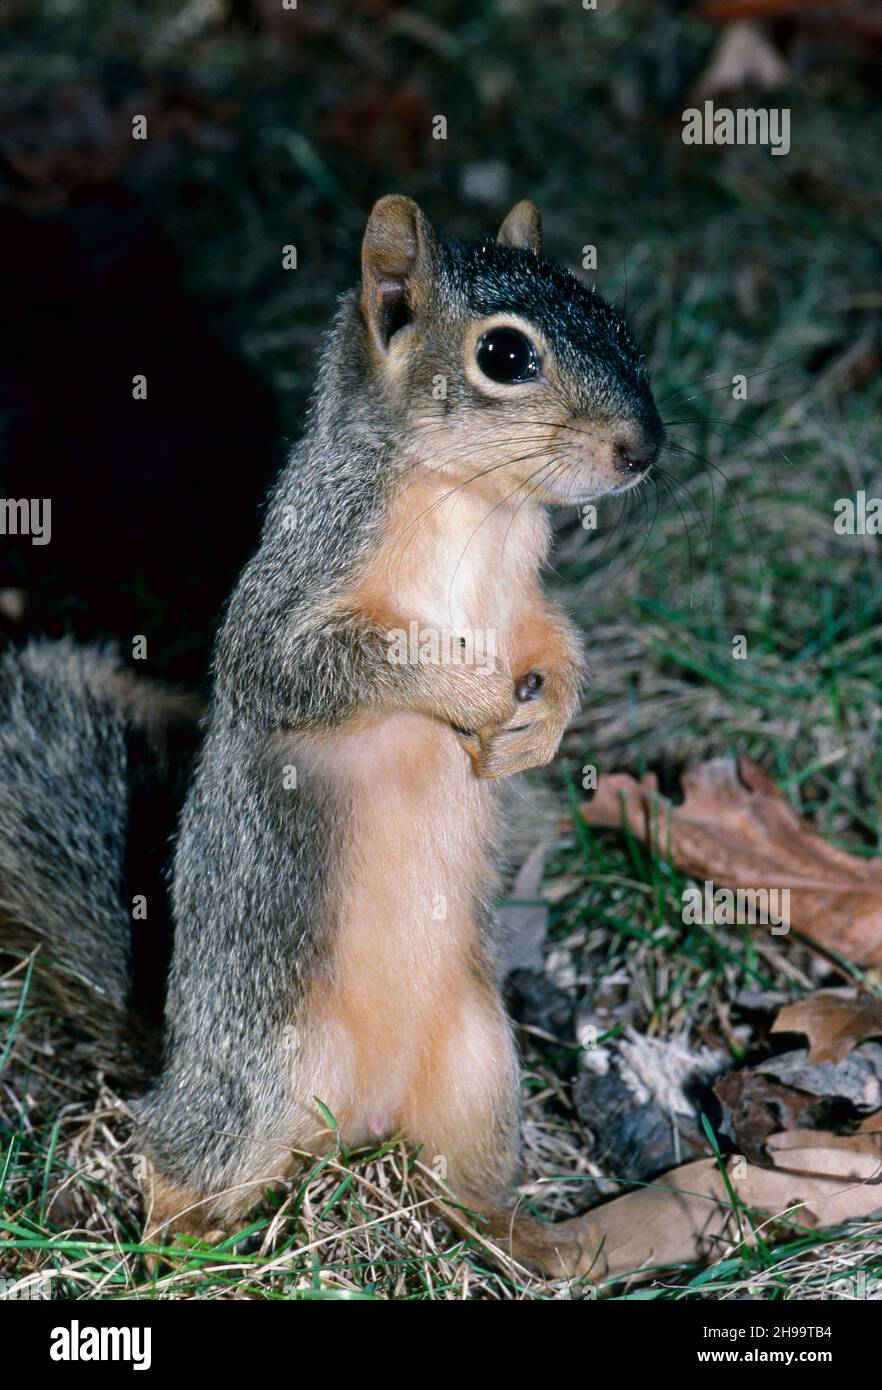 Young eastern gray squirrel standing in evening summer lawn holding food, Missouri, USA Stock Photo